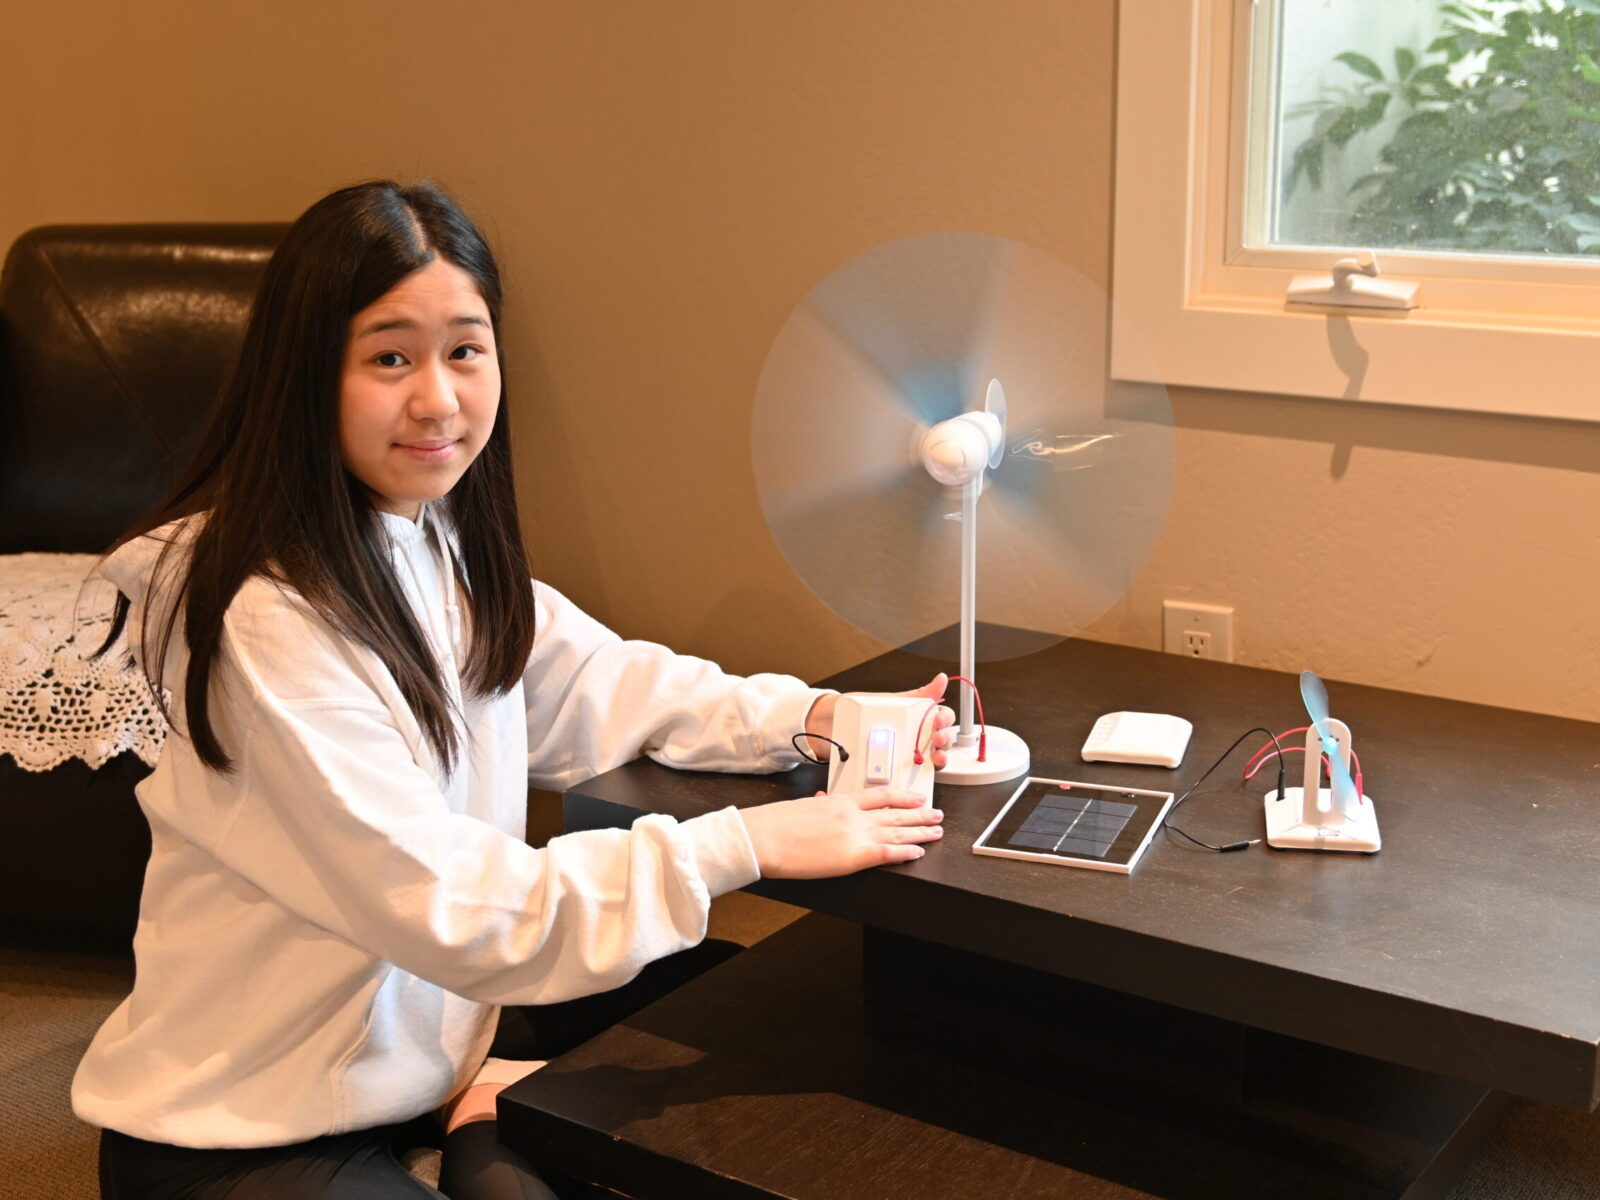 Youth sitting next to model of wind turbine and small solar panel